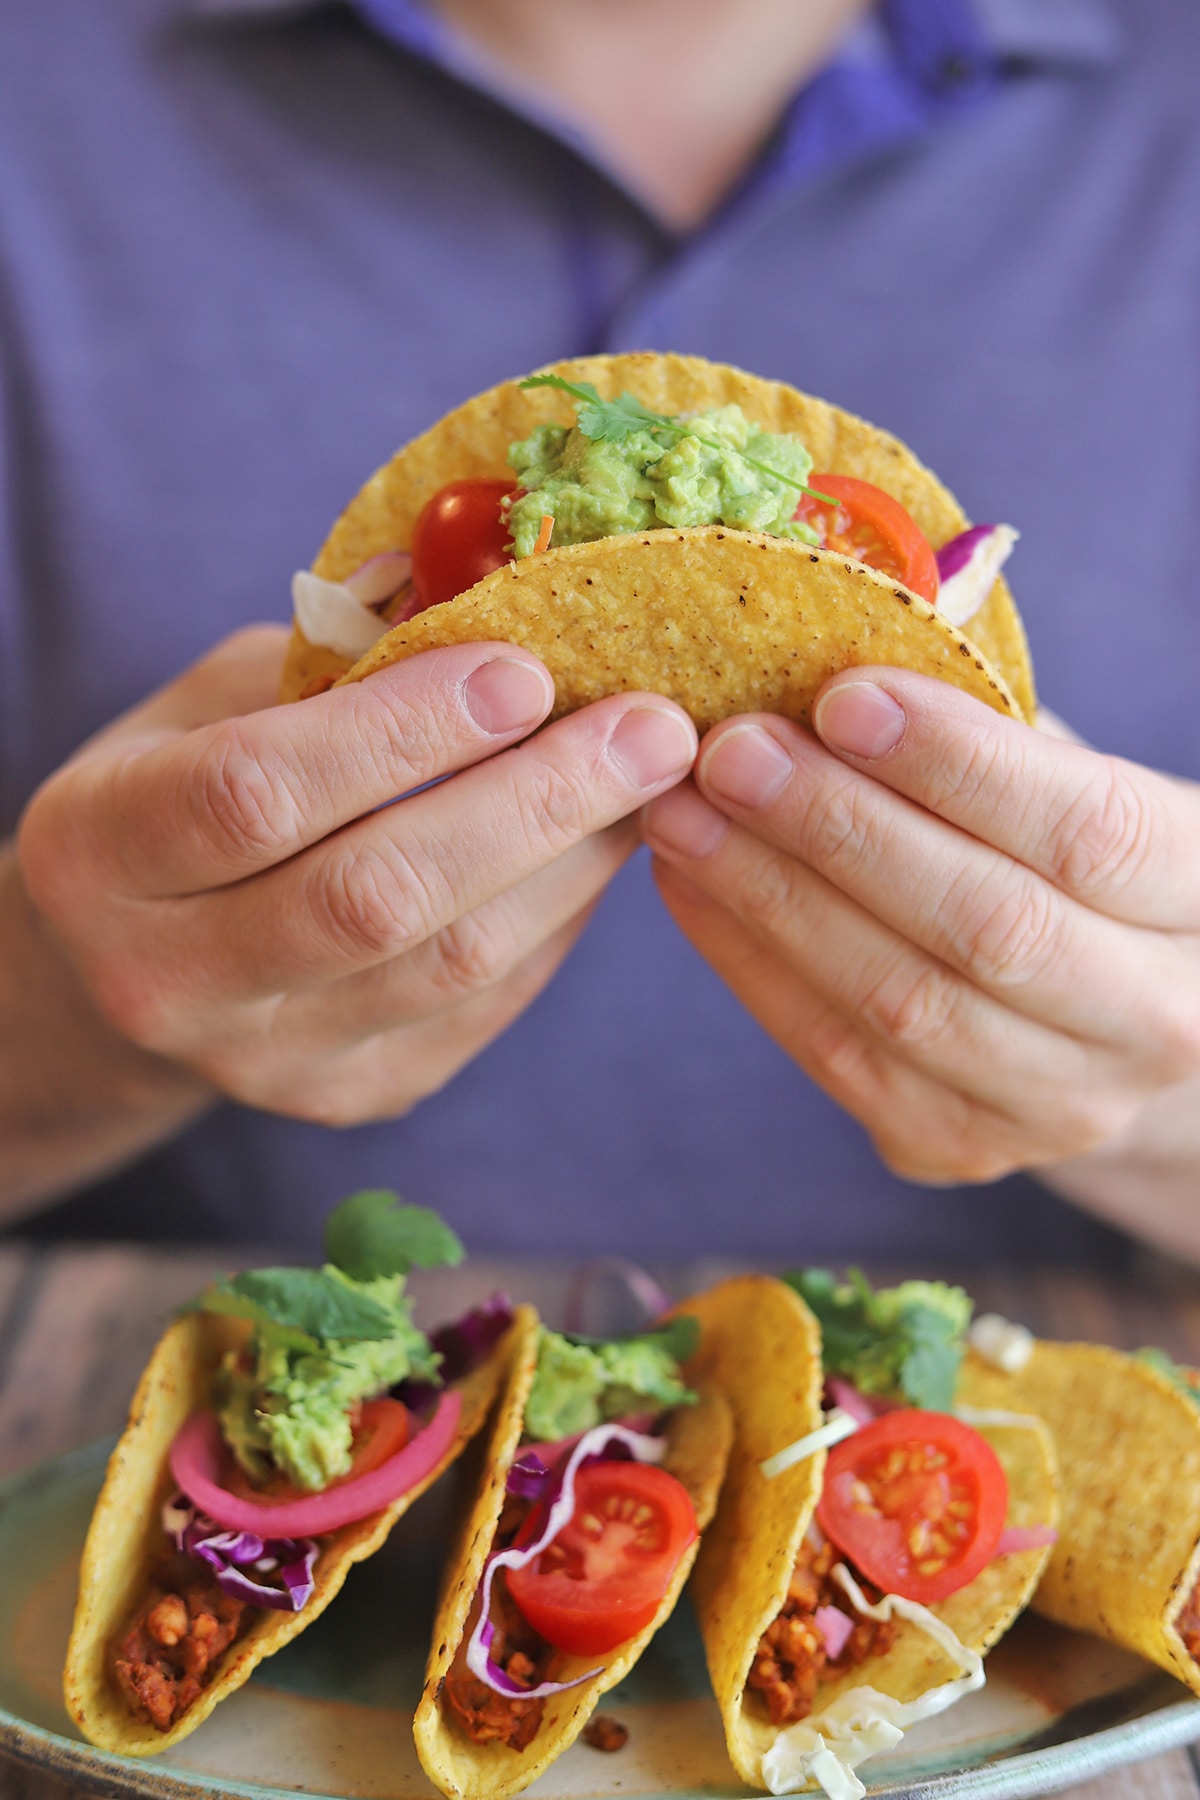 Hand holding hard shell taco over platter of tacos.